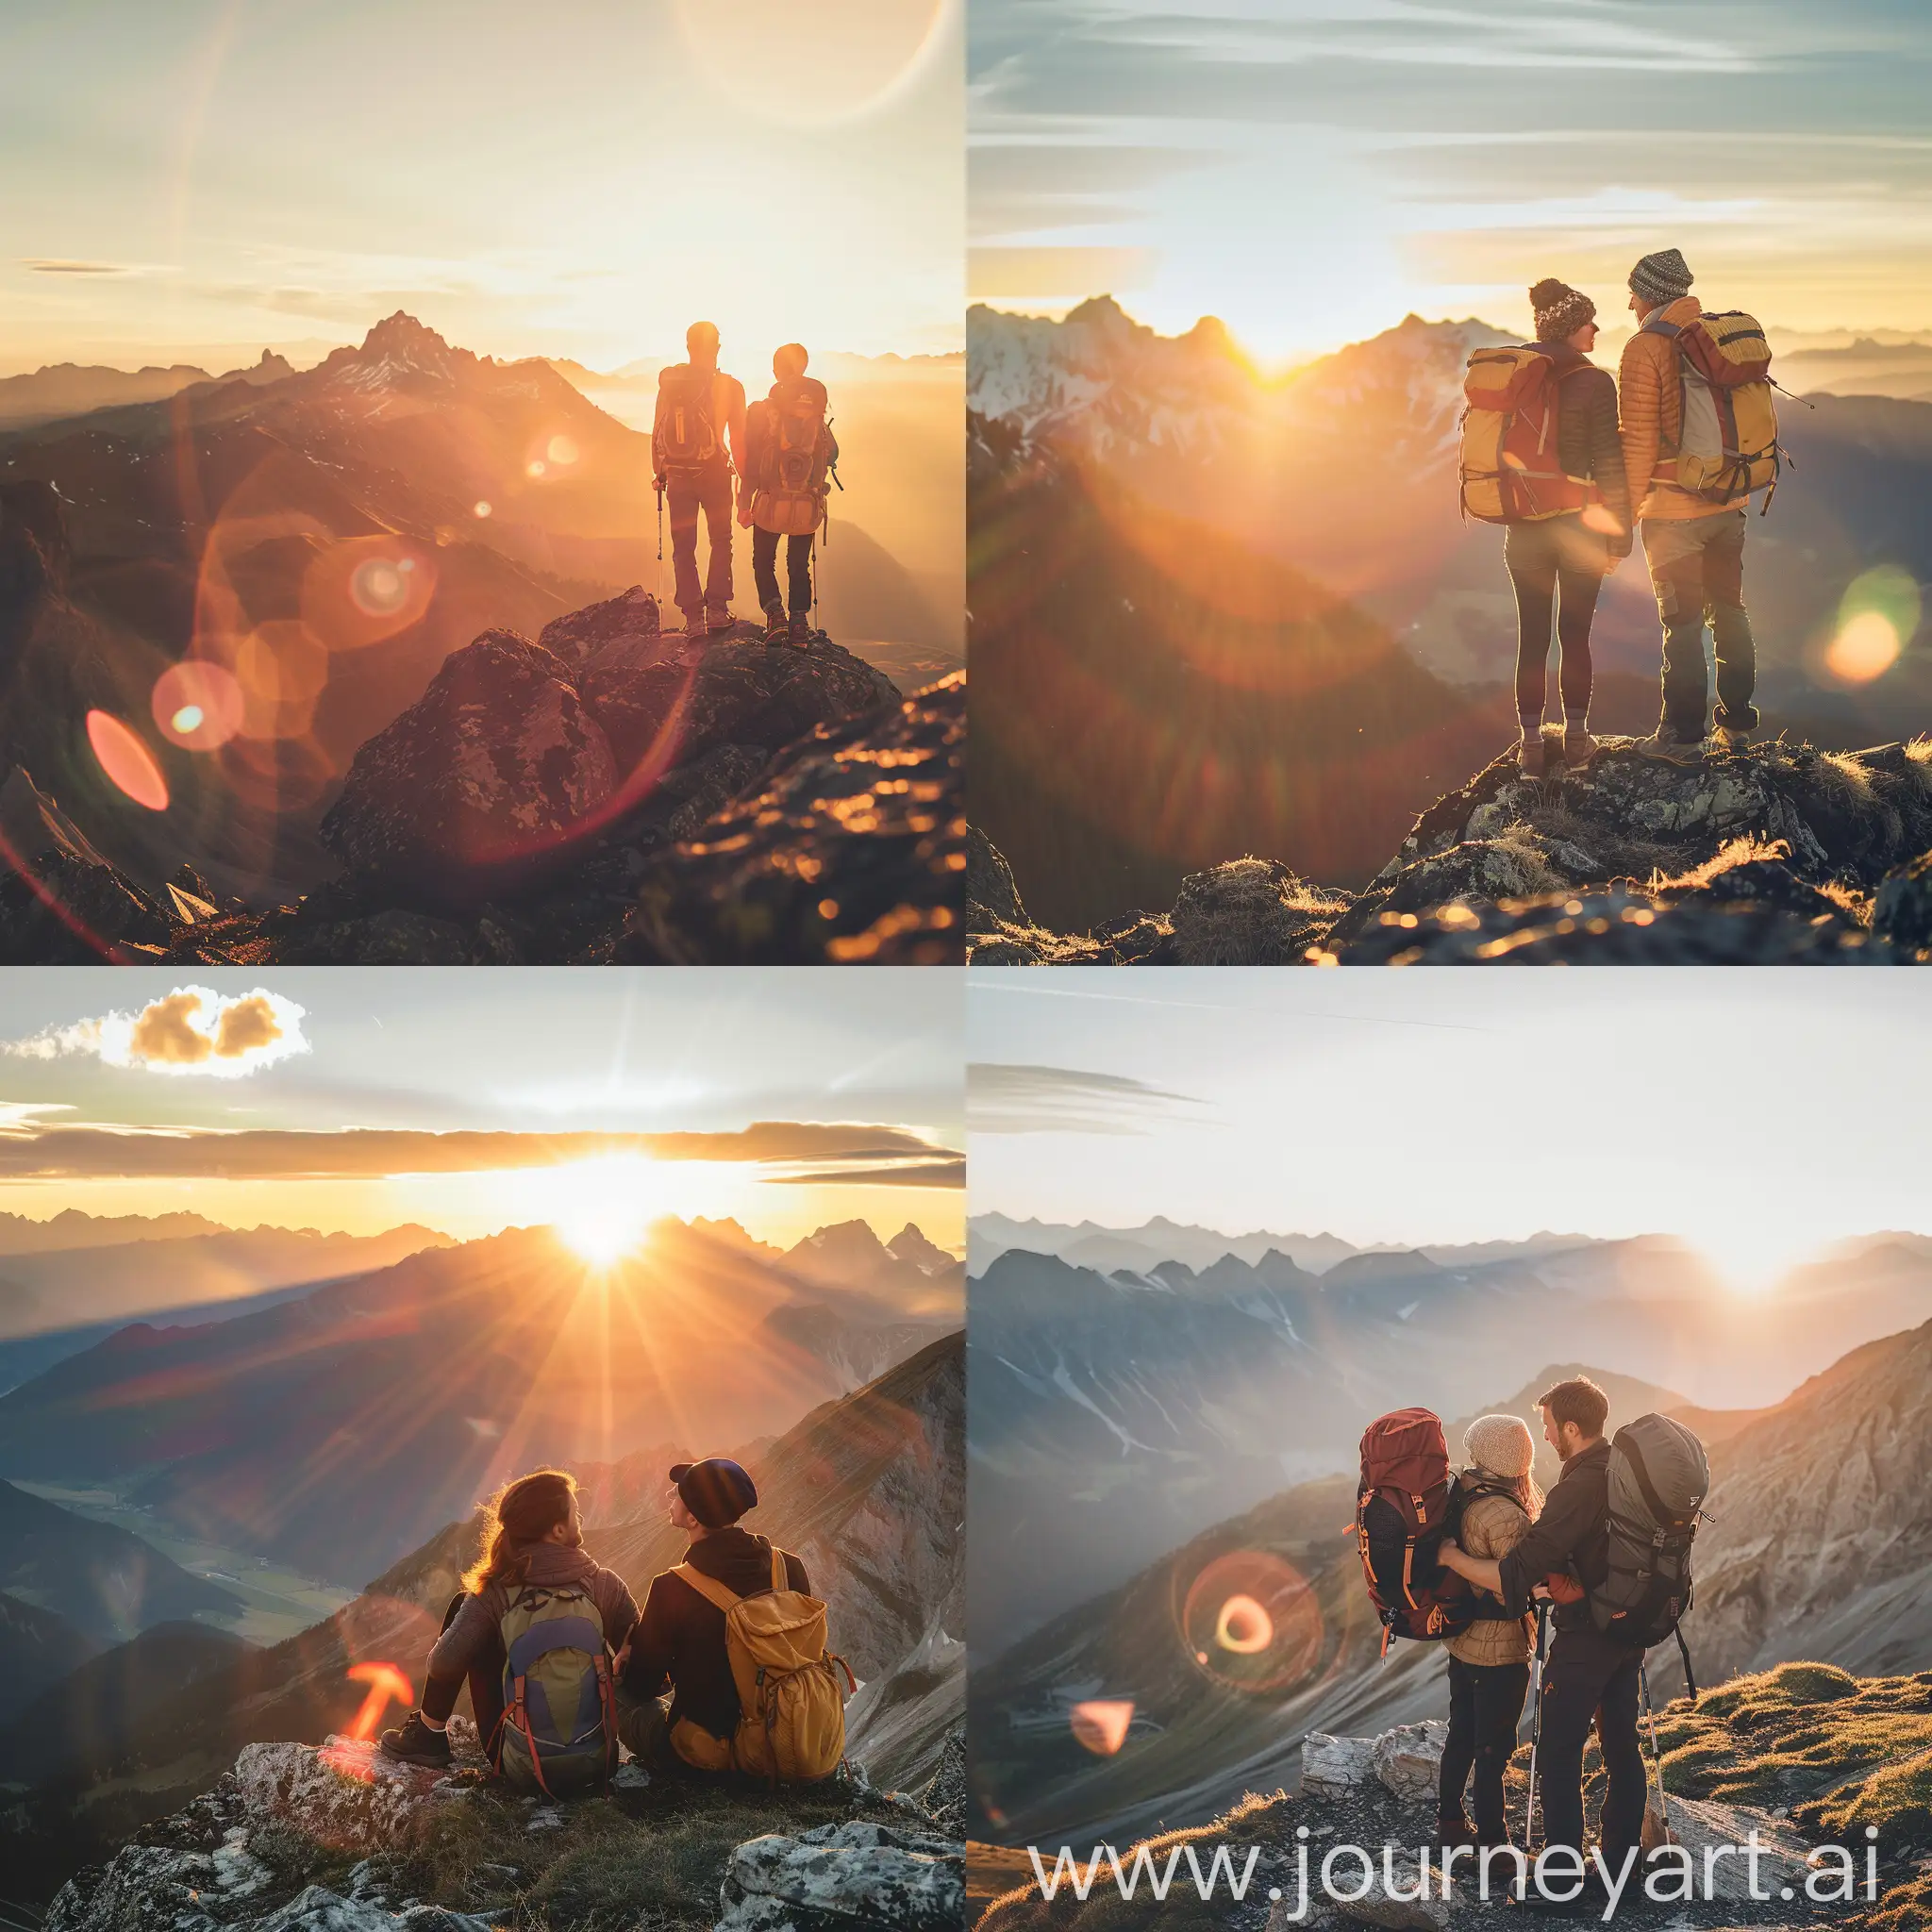  Couple hiker on top of mountain looking at beautiful sunrises landscape,super touching,super motivational,super real humans,lens flare.